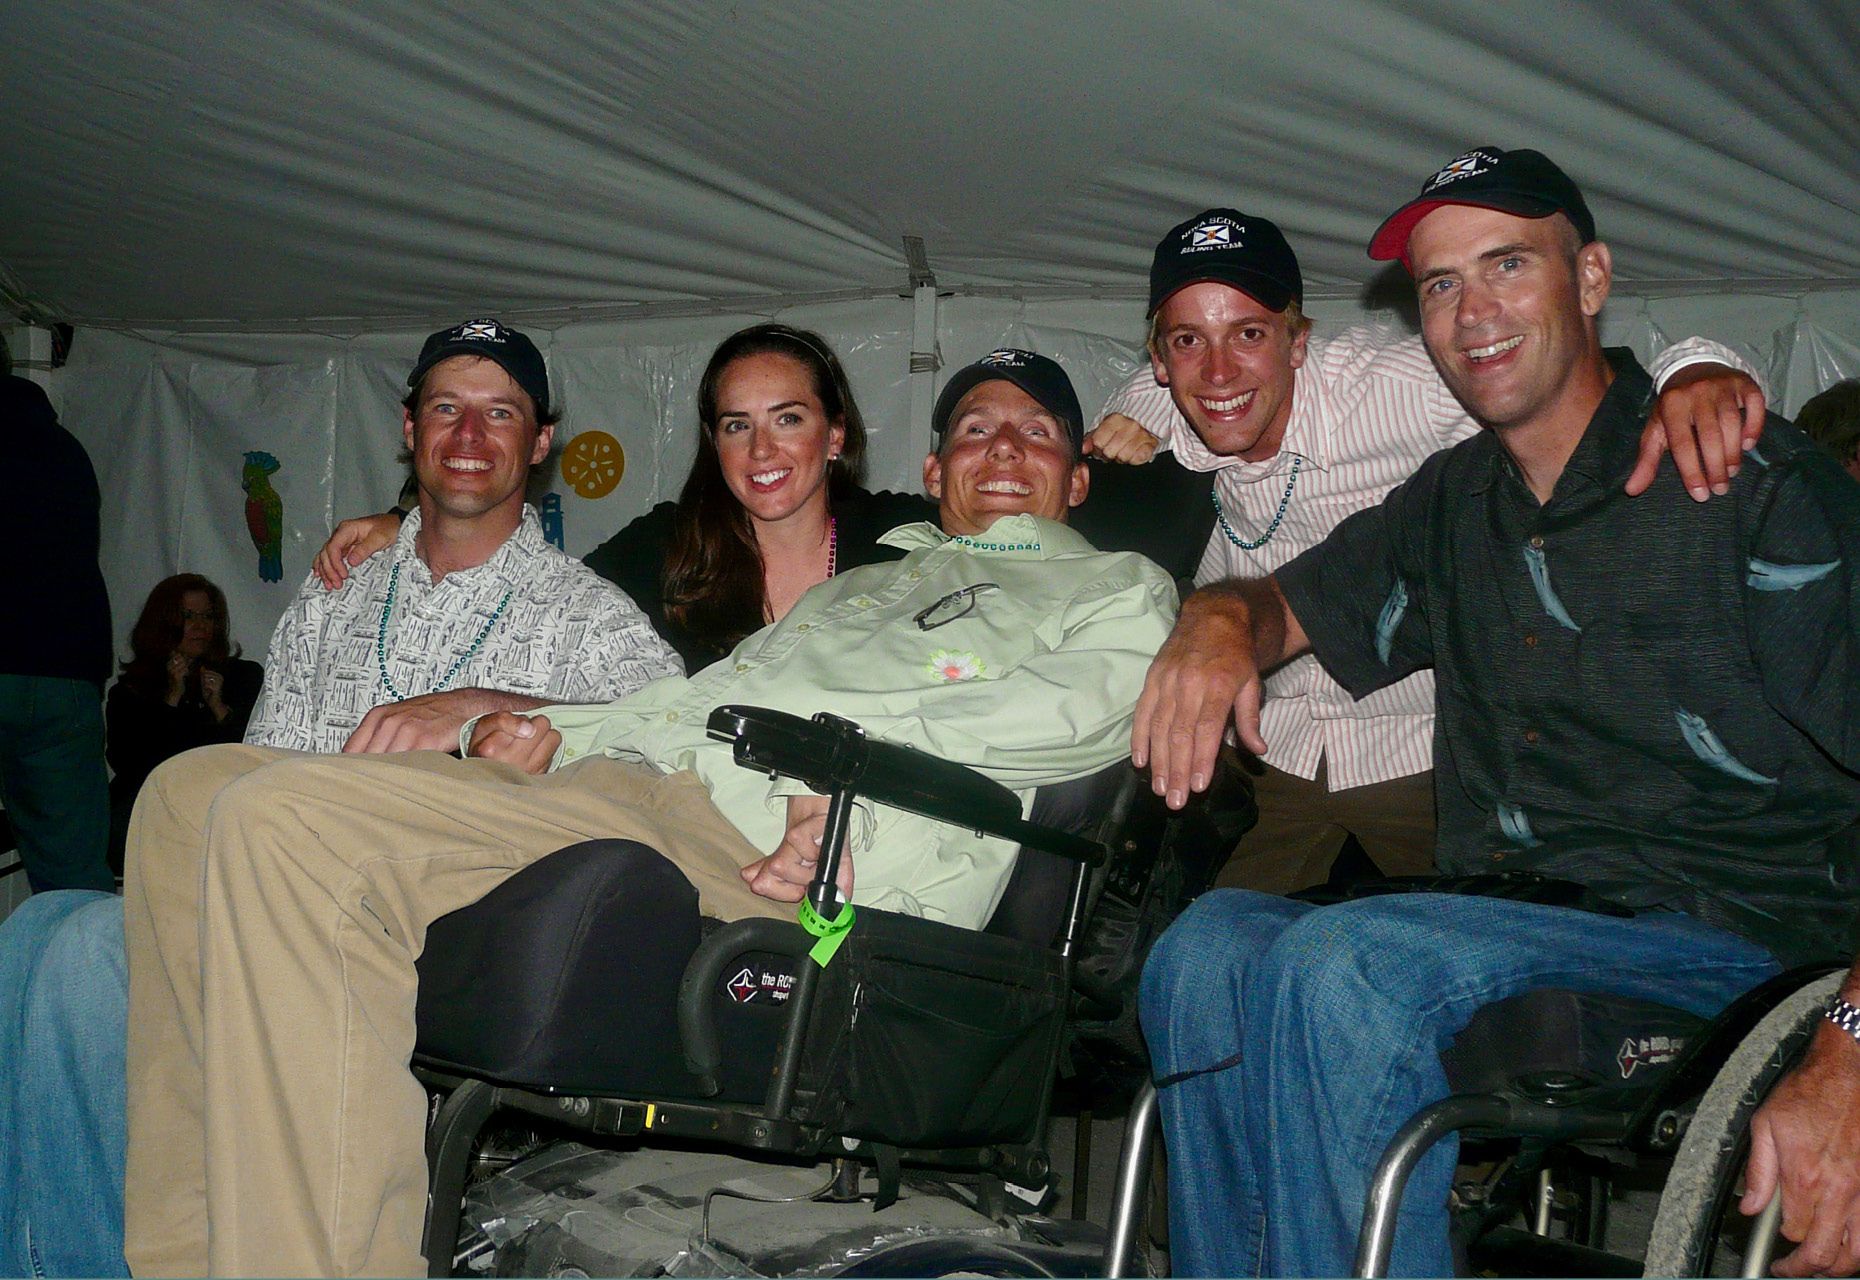 Two people in wheelchairs and three people standing n background